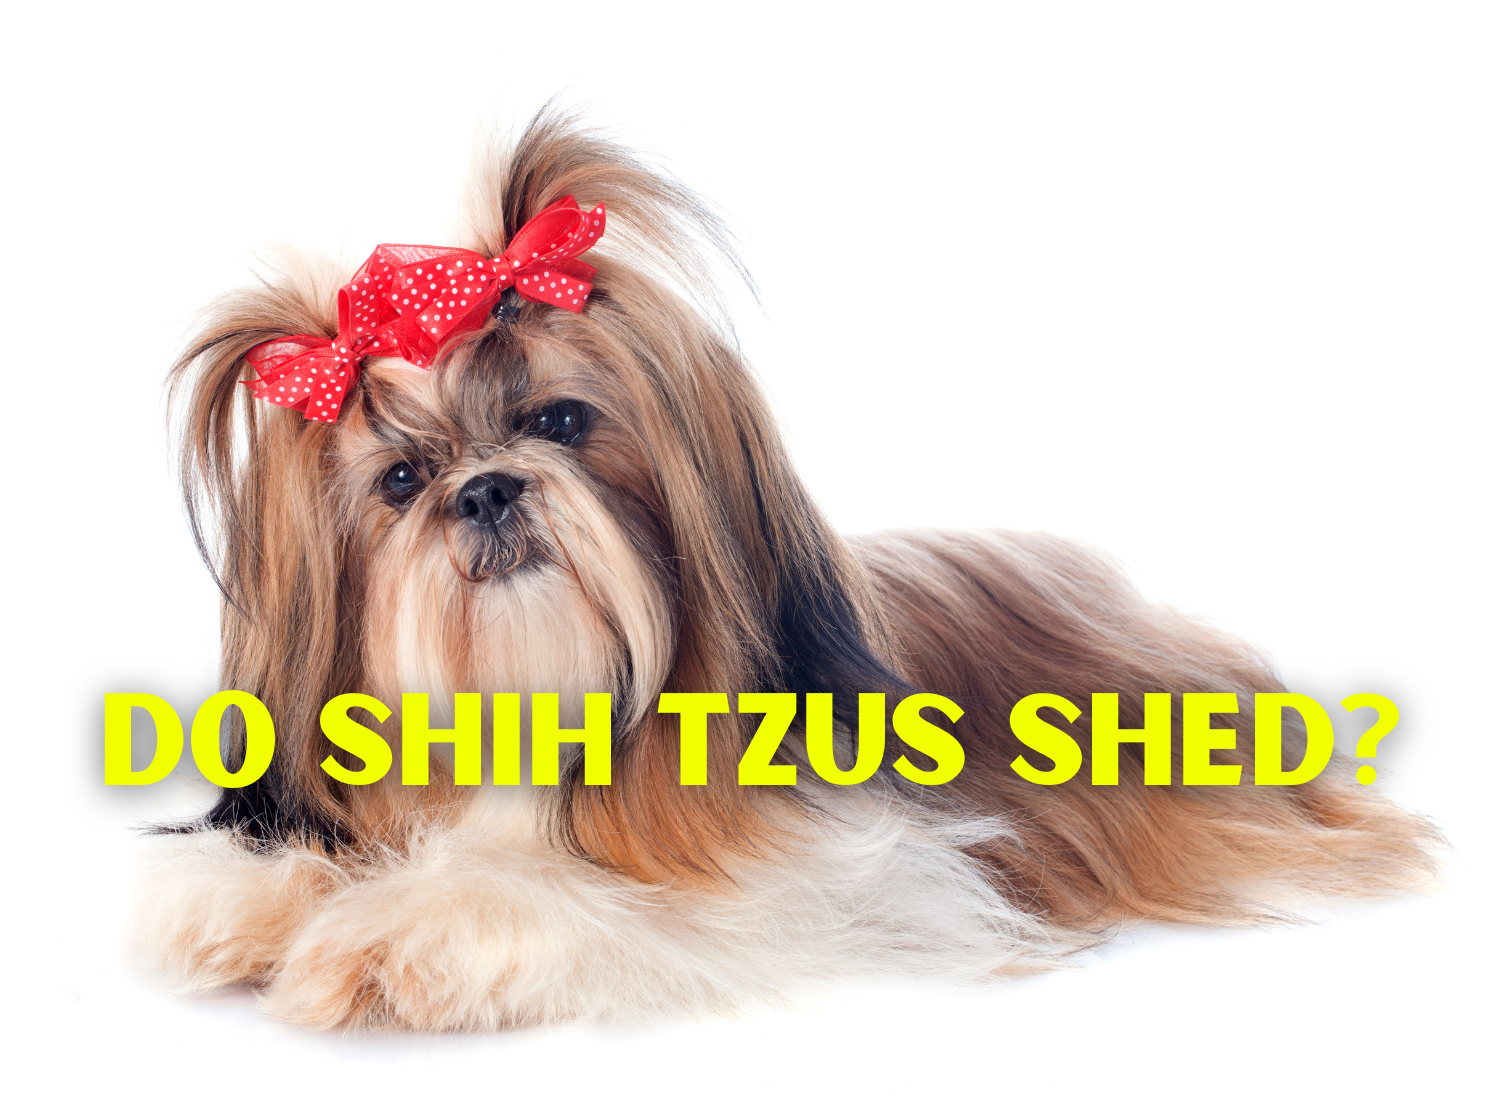 Shih Tzus shed less and are hypoallergenic dogs.